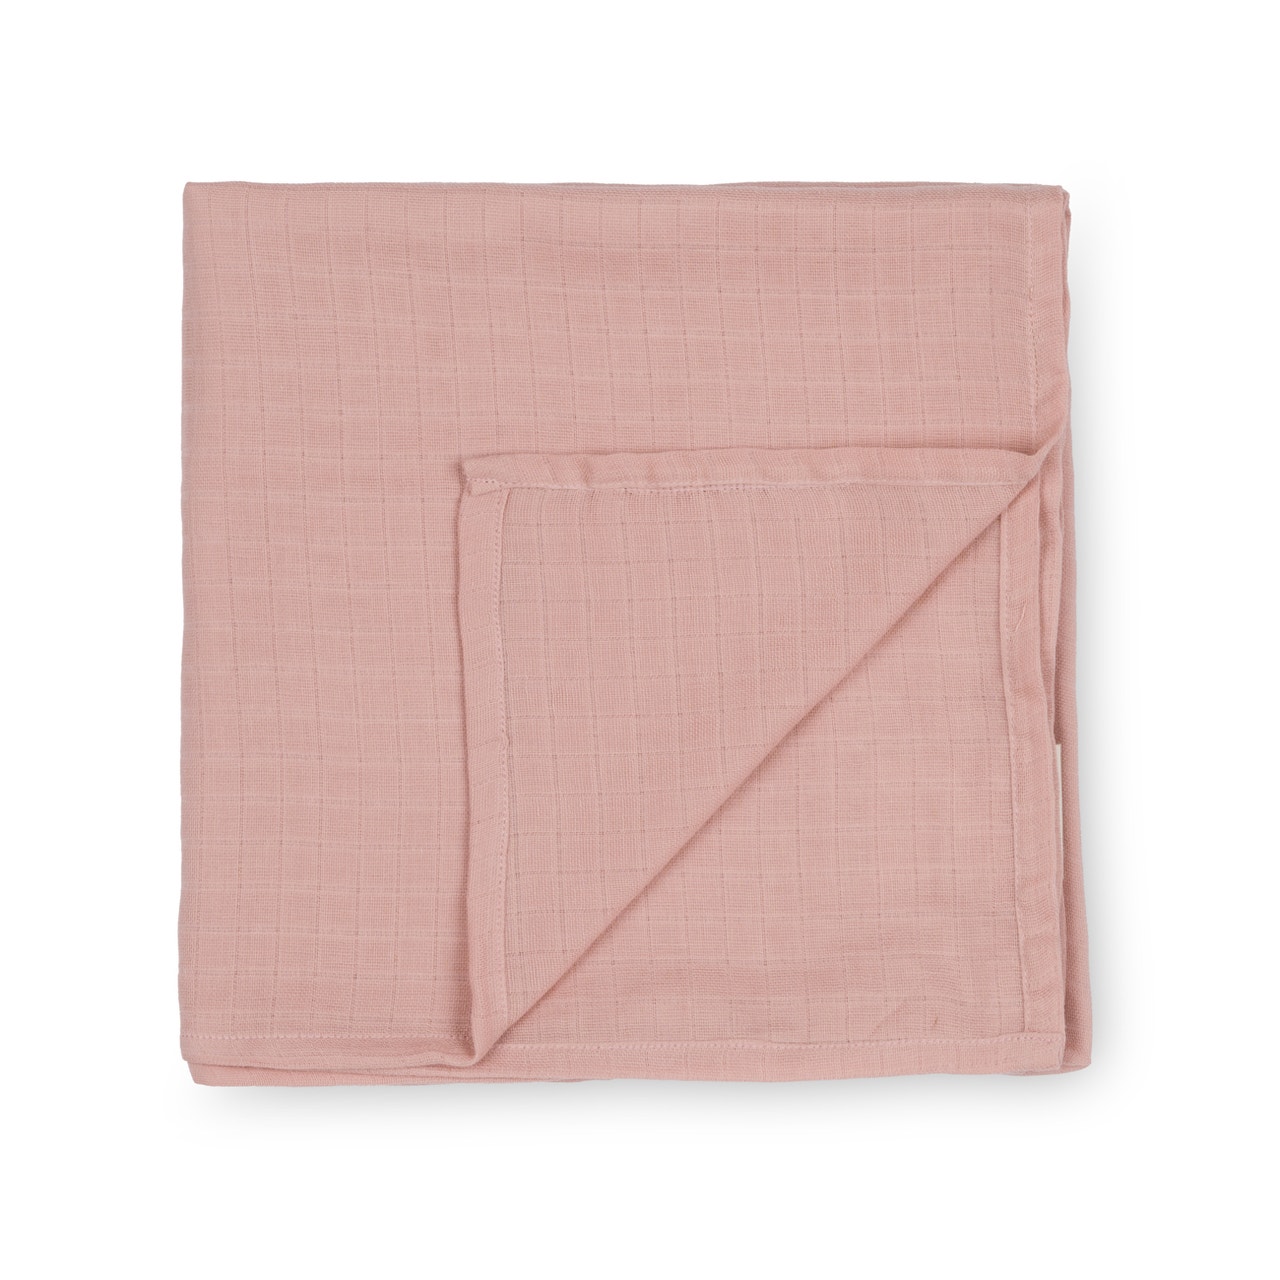 MAMA.LICIOUS that's mine Muslin Swaddle -Rose - 88888887